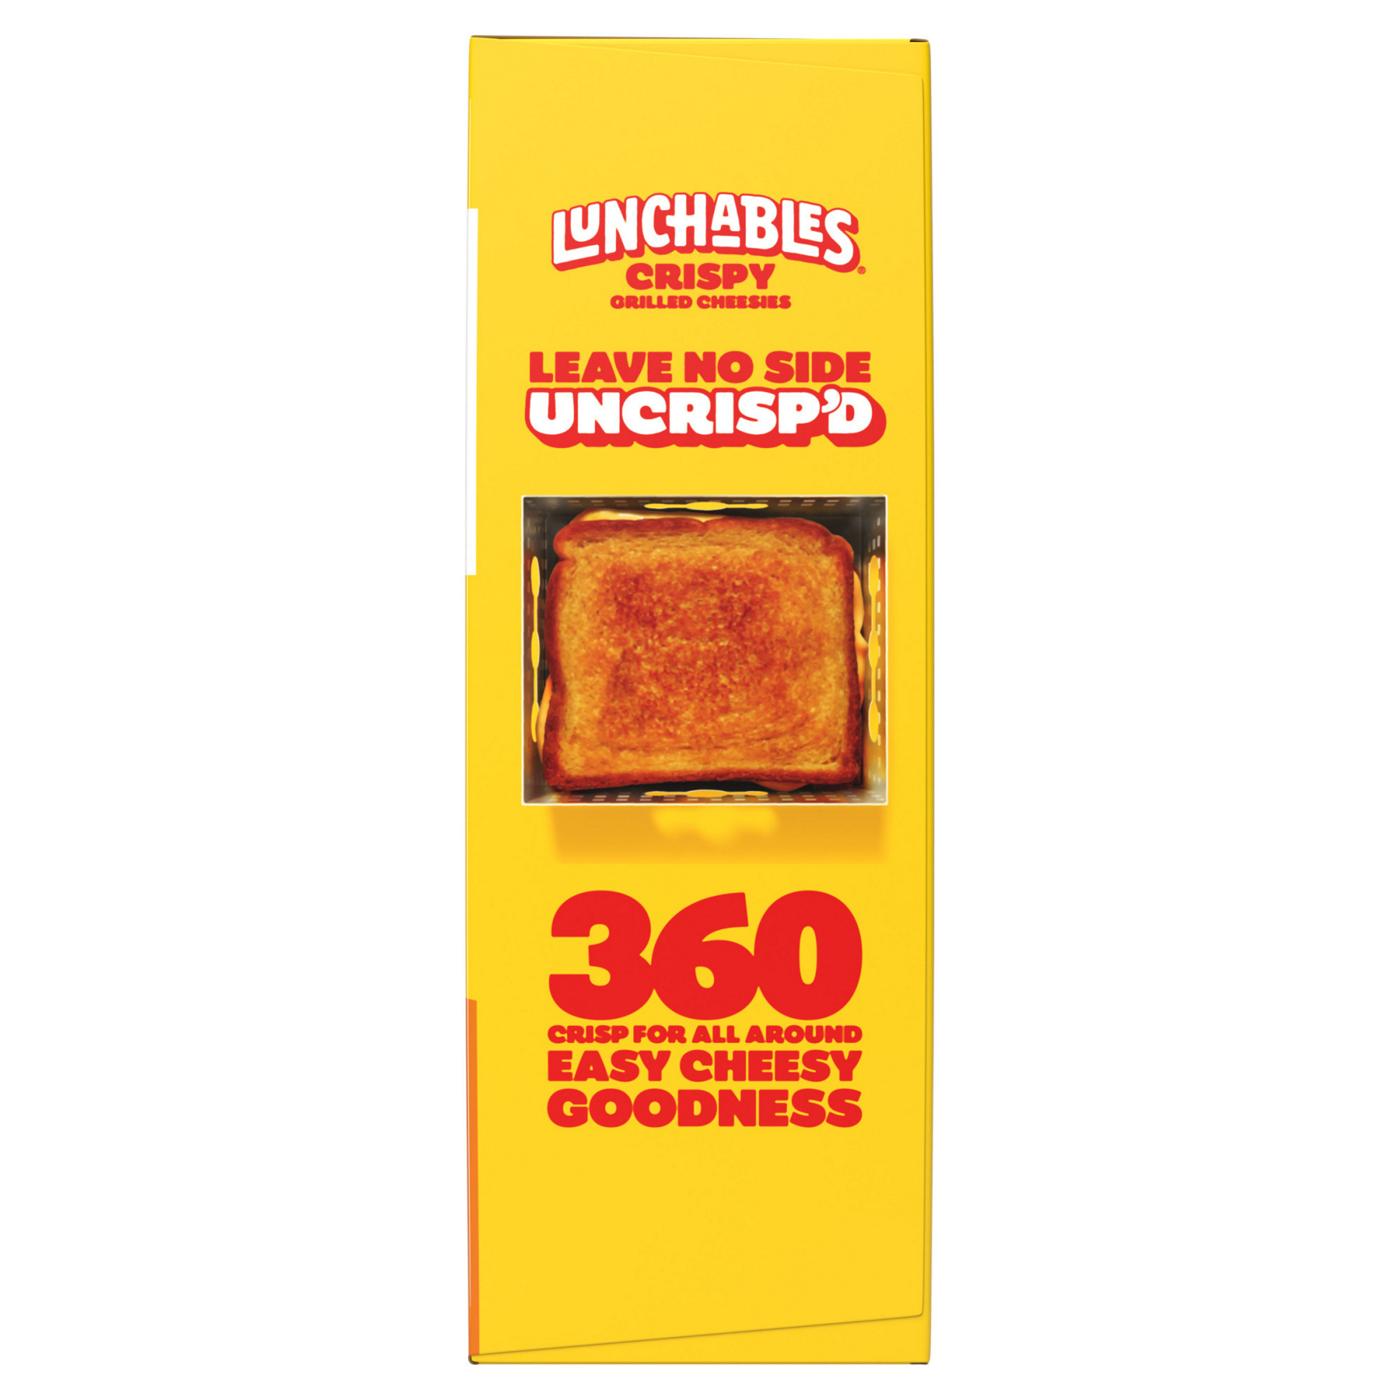 Lunchables Crispy Grilled Cheesies Frozen Sandwiches - Original; image 2 of 9